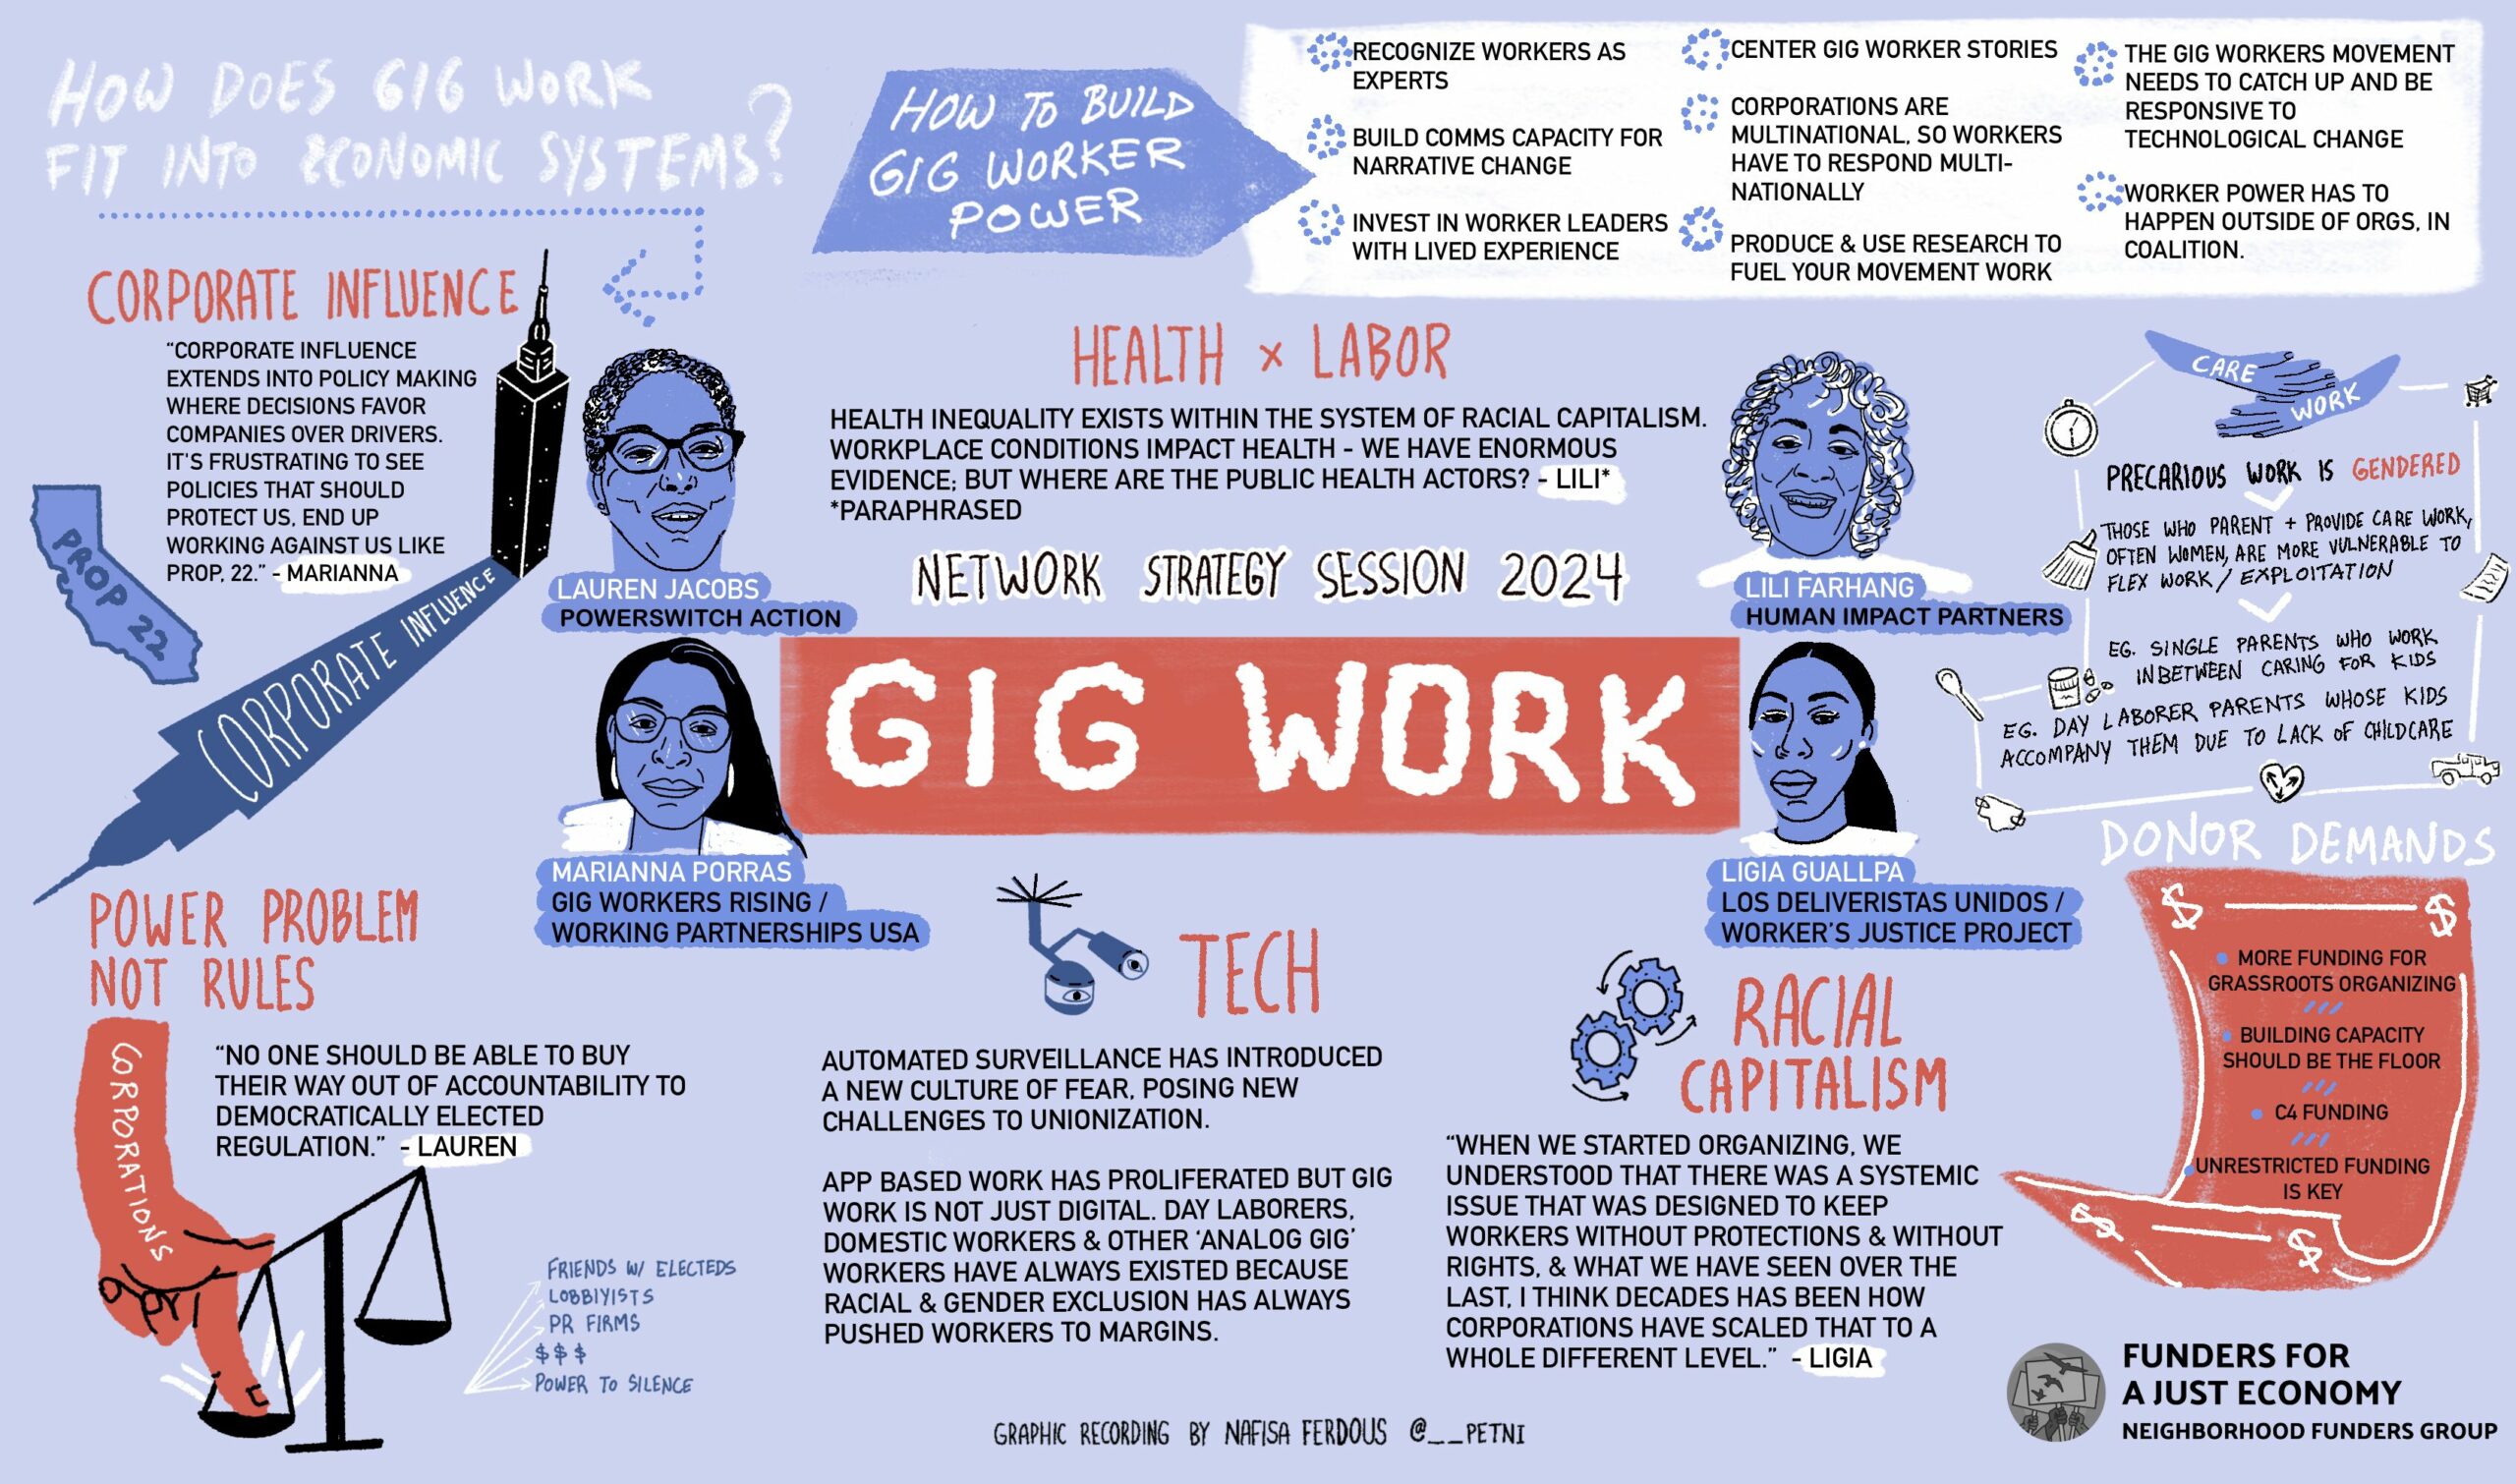 Graphic Recording of Gig work panel